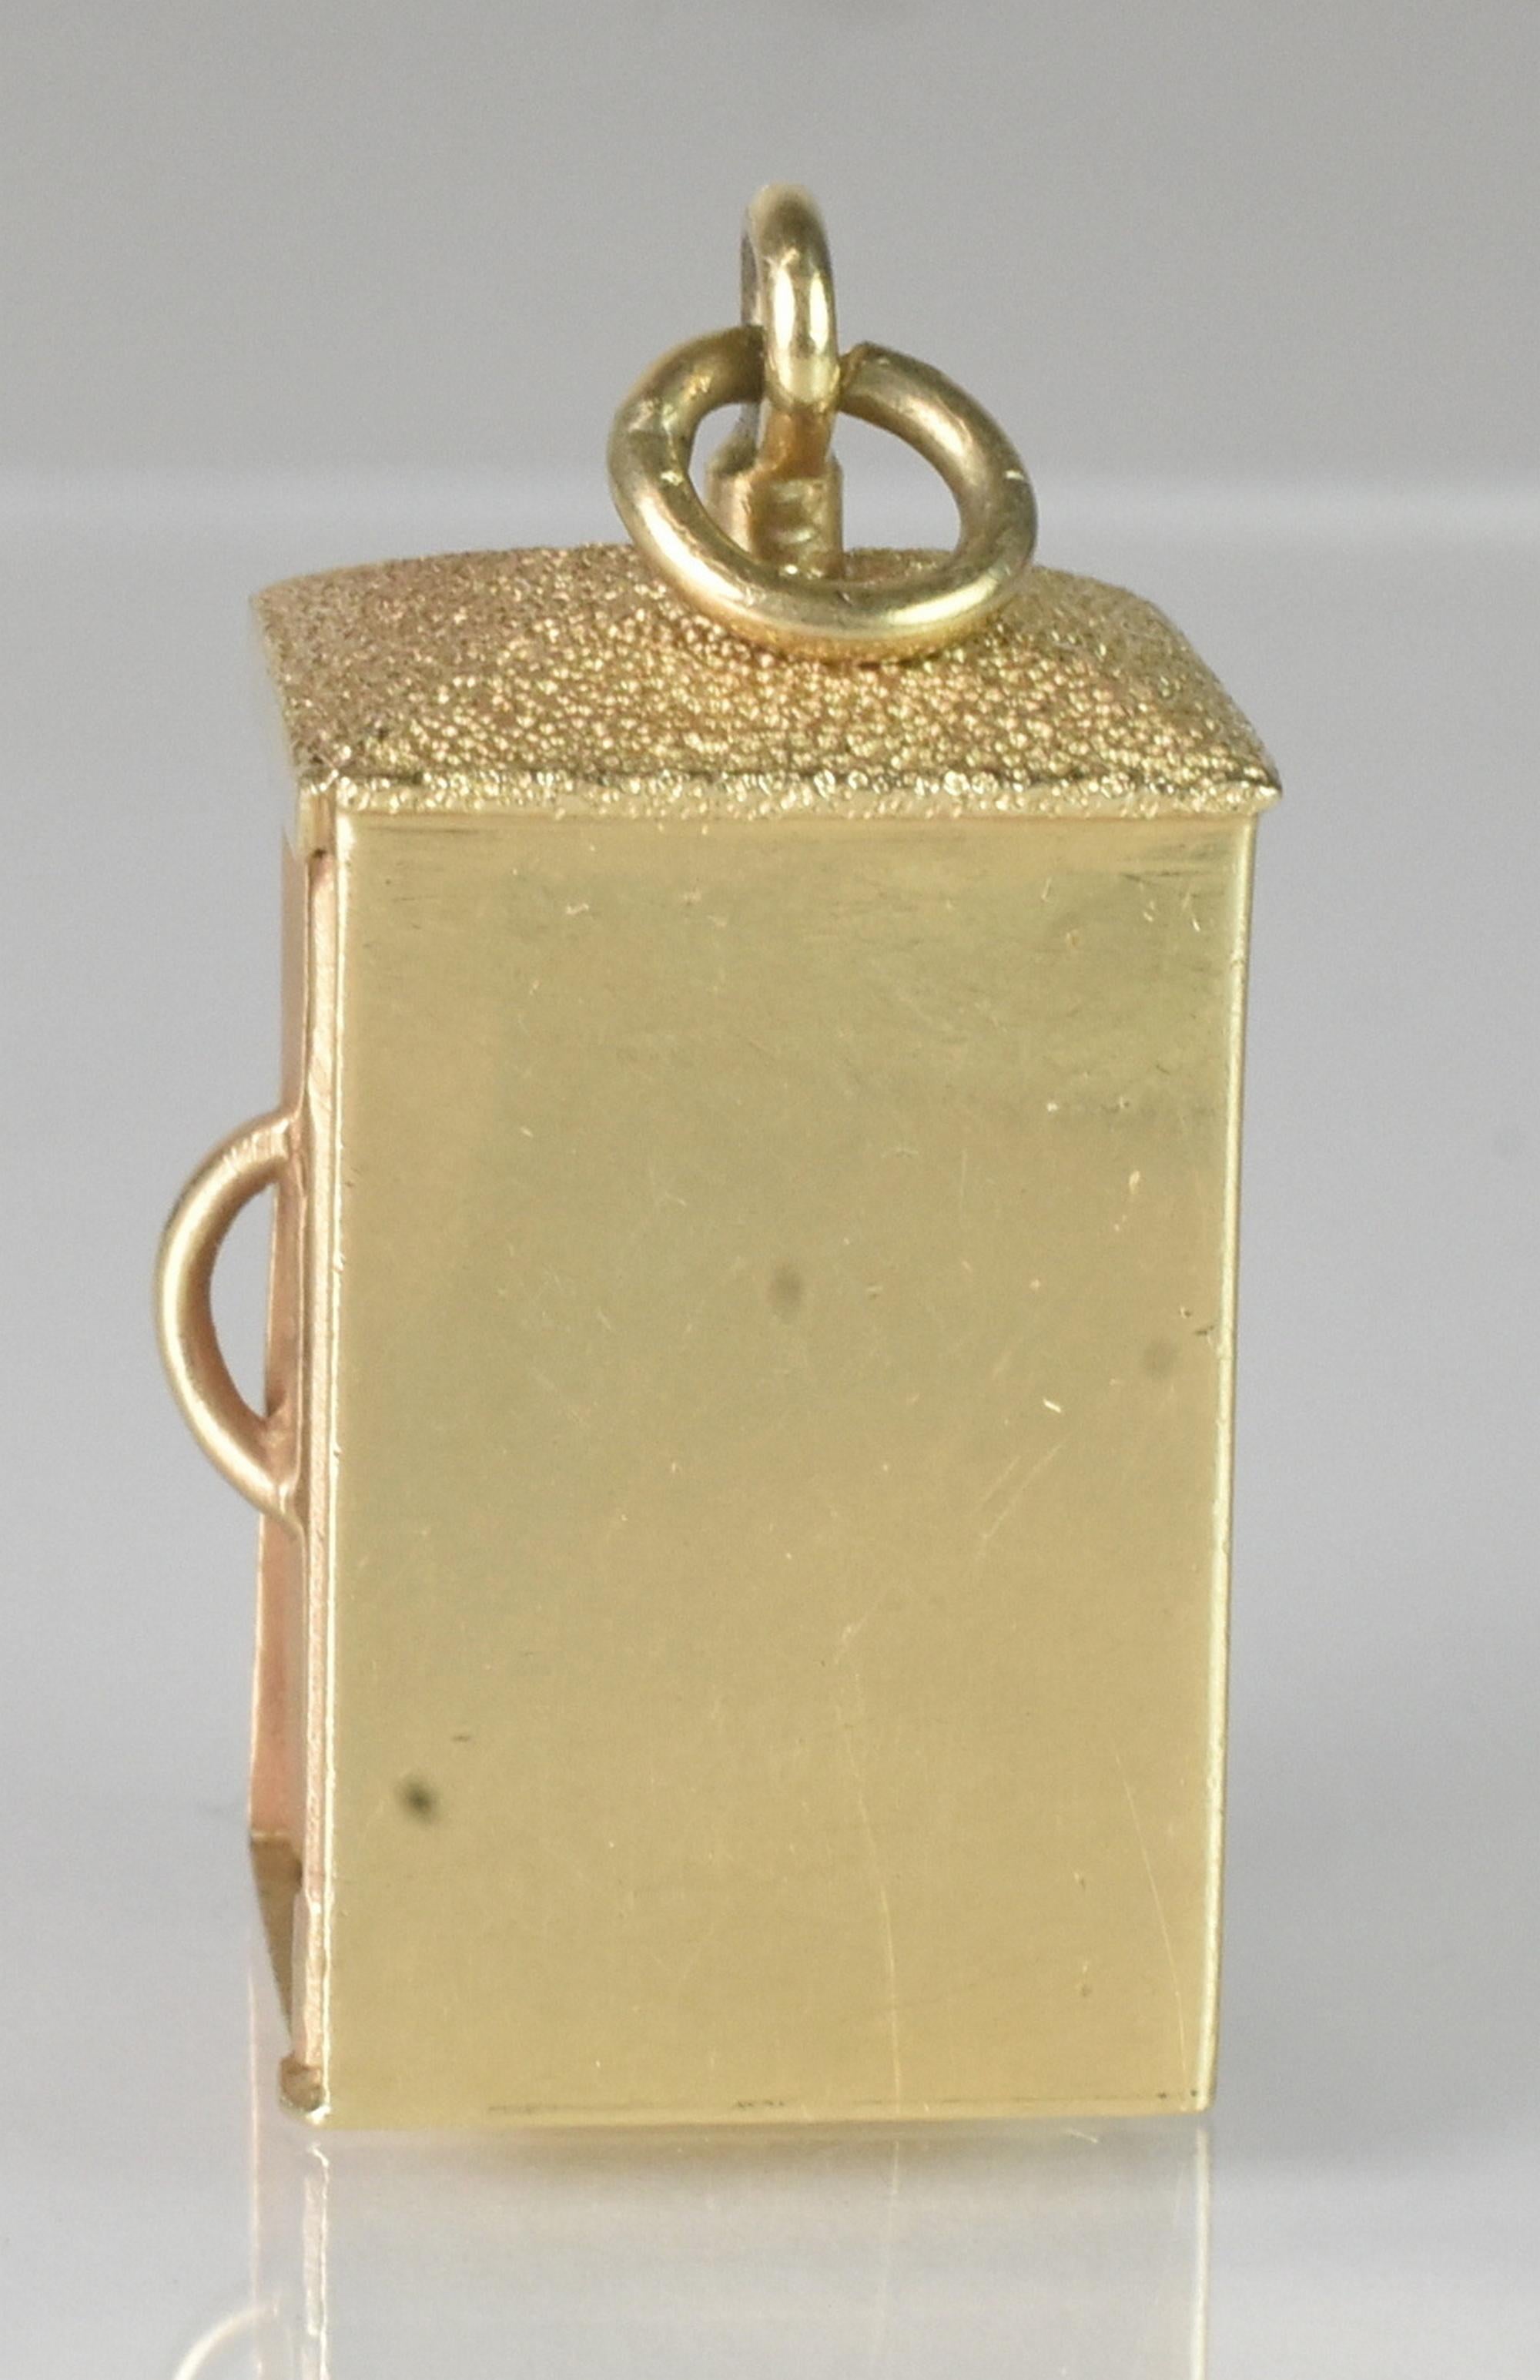 14k Gold Phonebooth Charm Pendant with Gems by Dankner For Sale 1